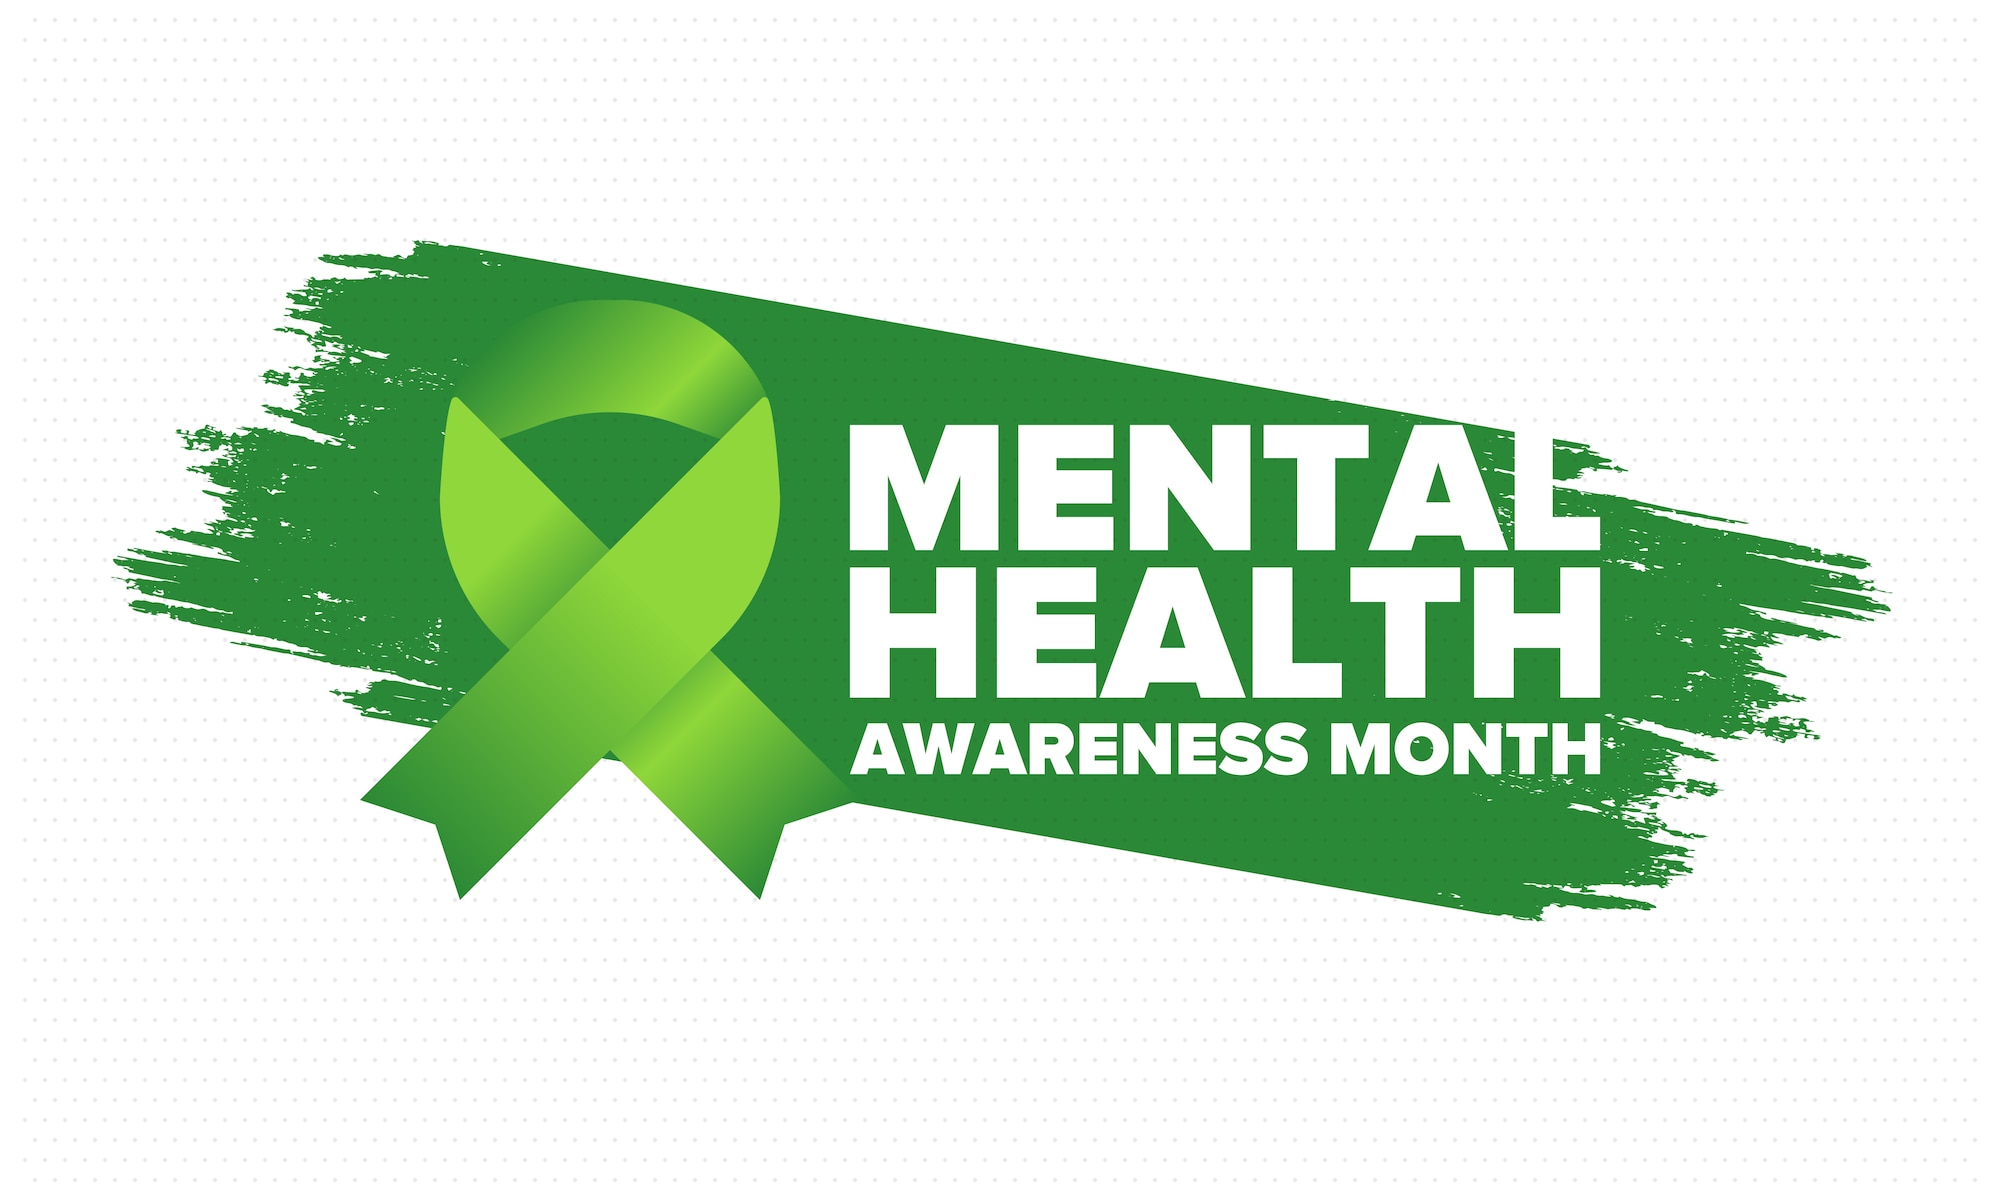 Mental Health Awareness Graphic (Courtesy Graphic)